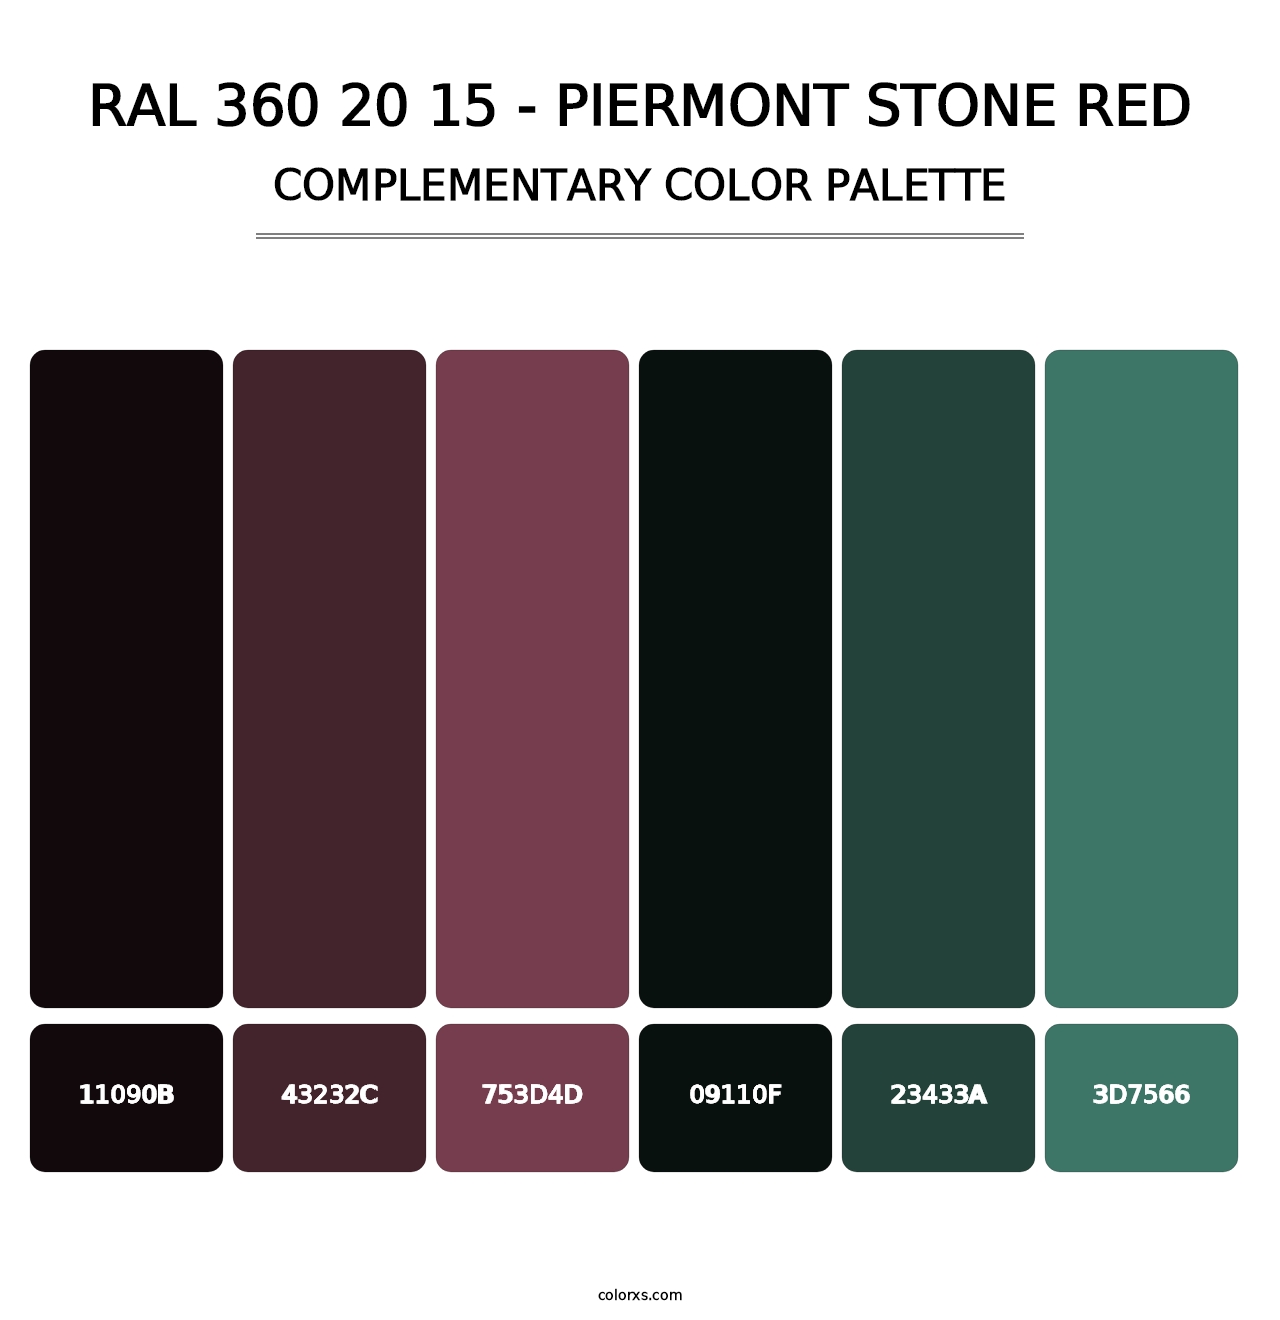 RAL 360 20 15 - Piermont Stone Red - Complementary Color Palette